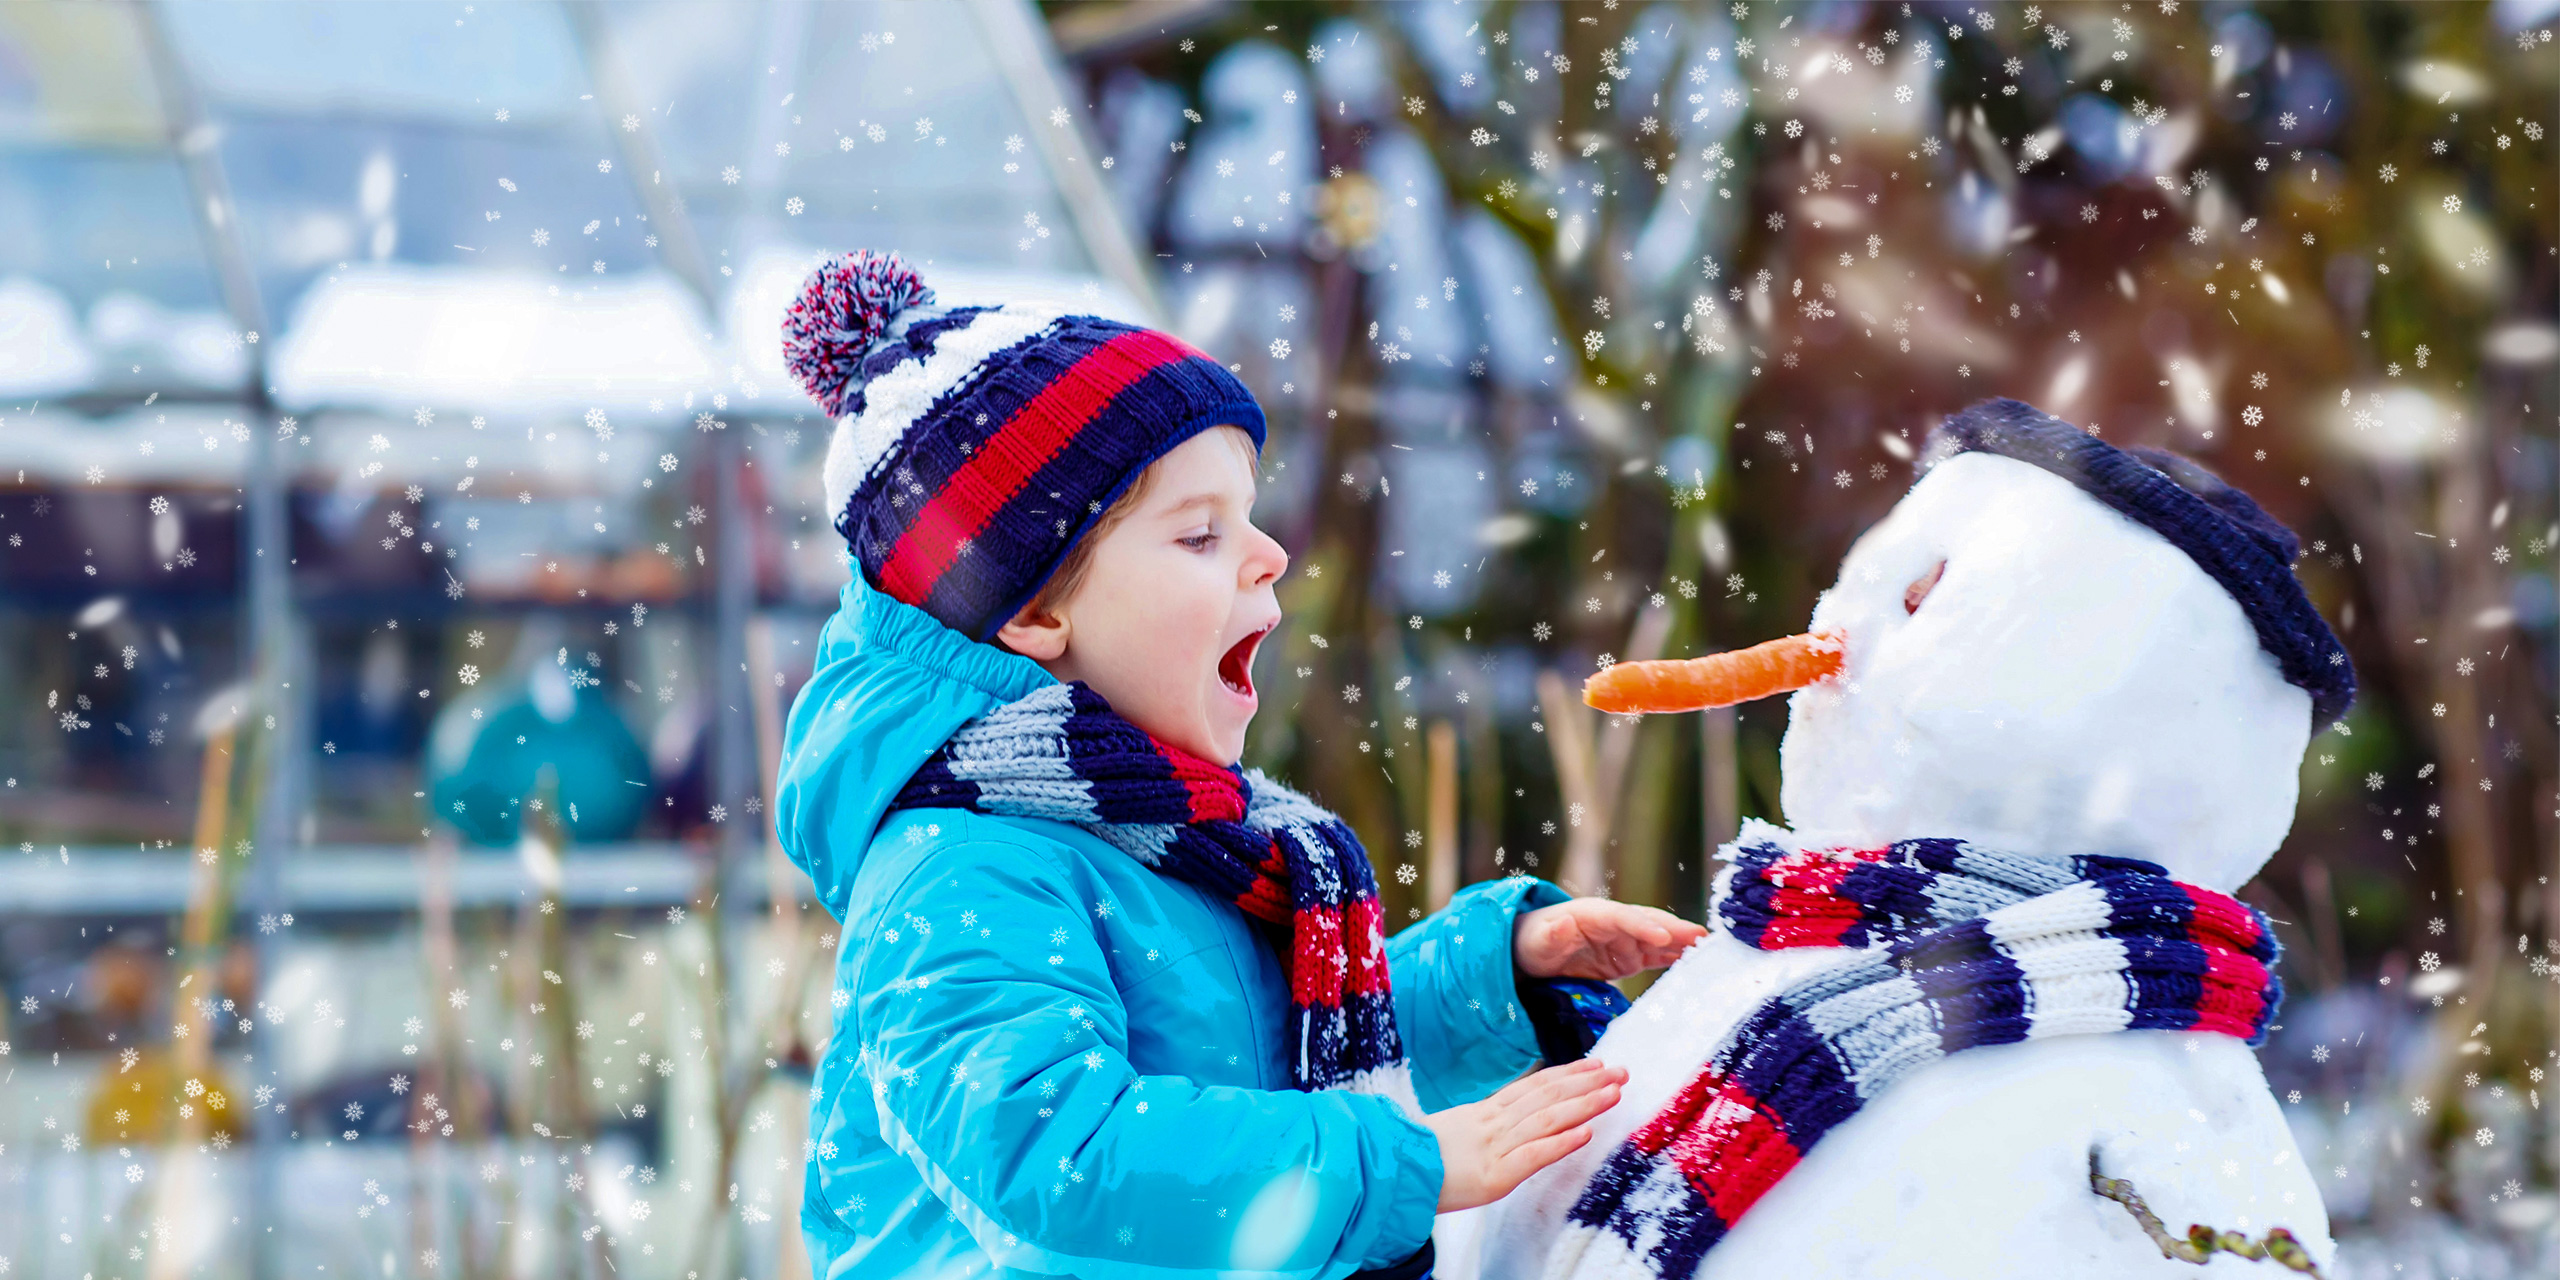 little kid boy making a snowman and eating carrot. child playing and having fun with snow on cold day.; Courtesy of Romrodphoto/Shutterstock